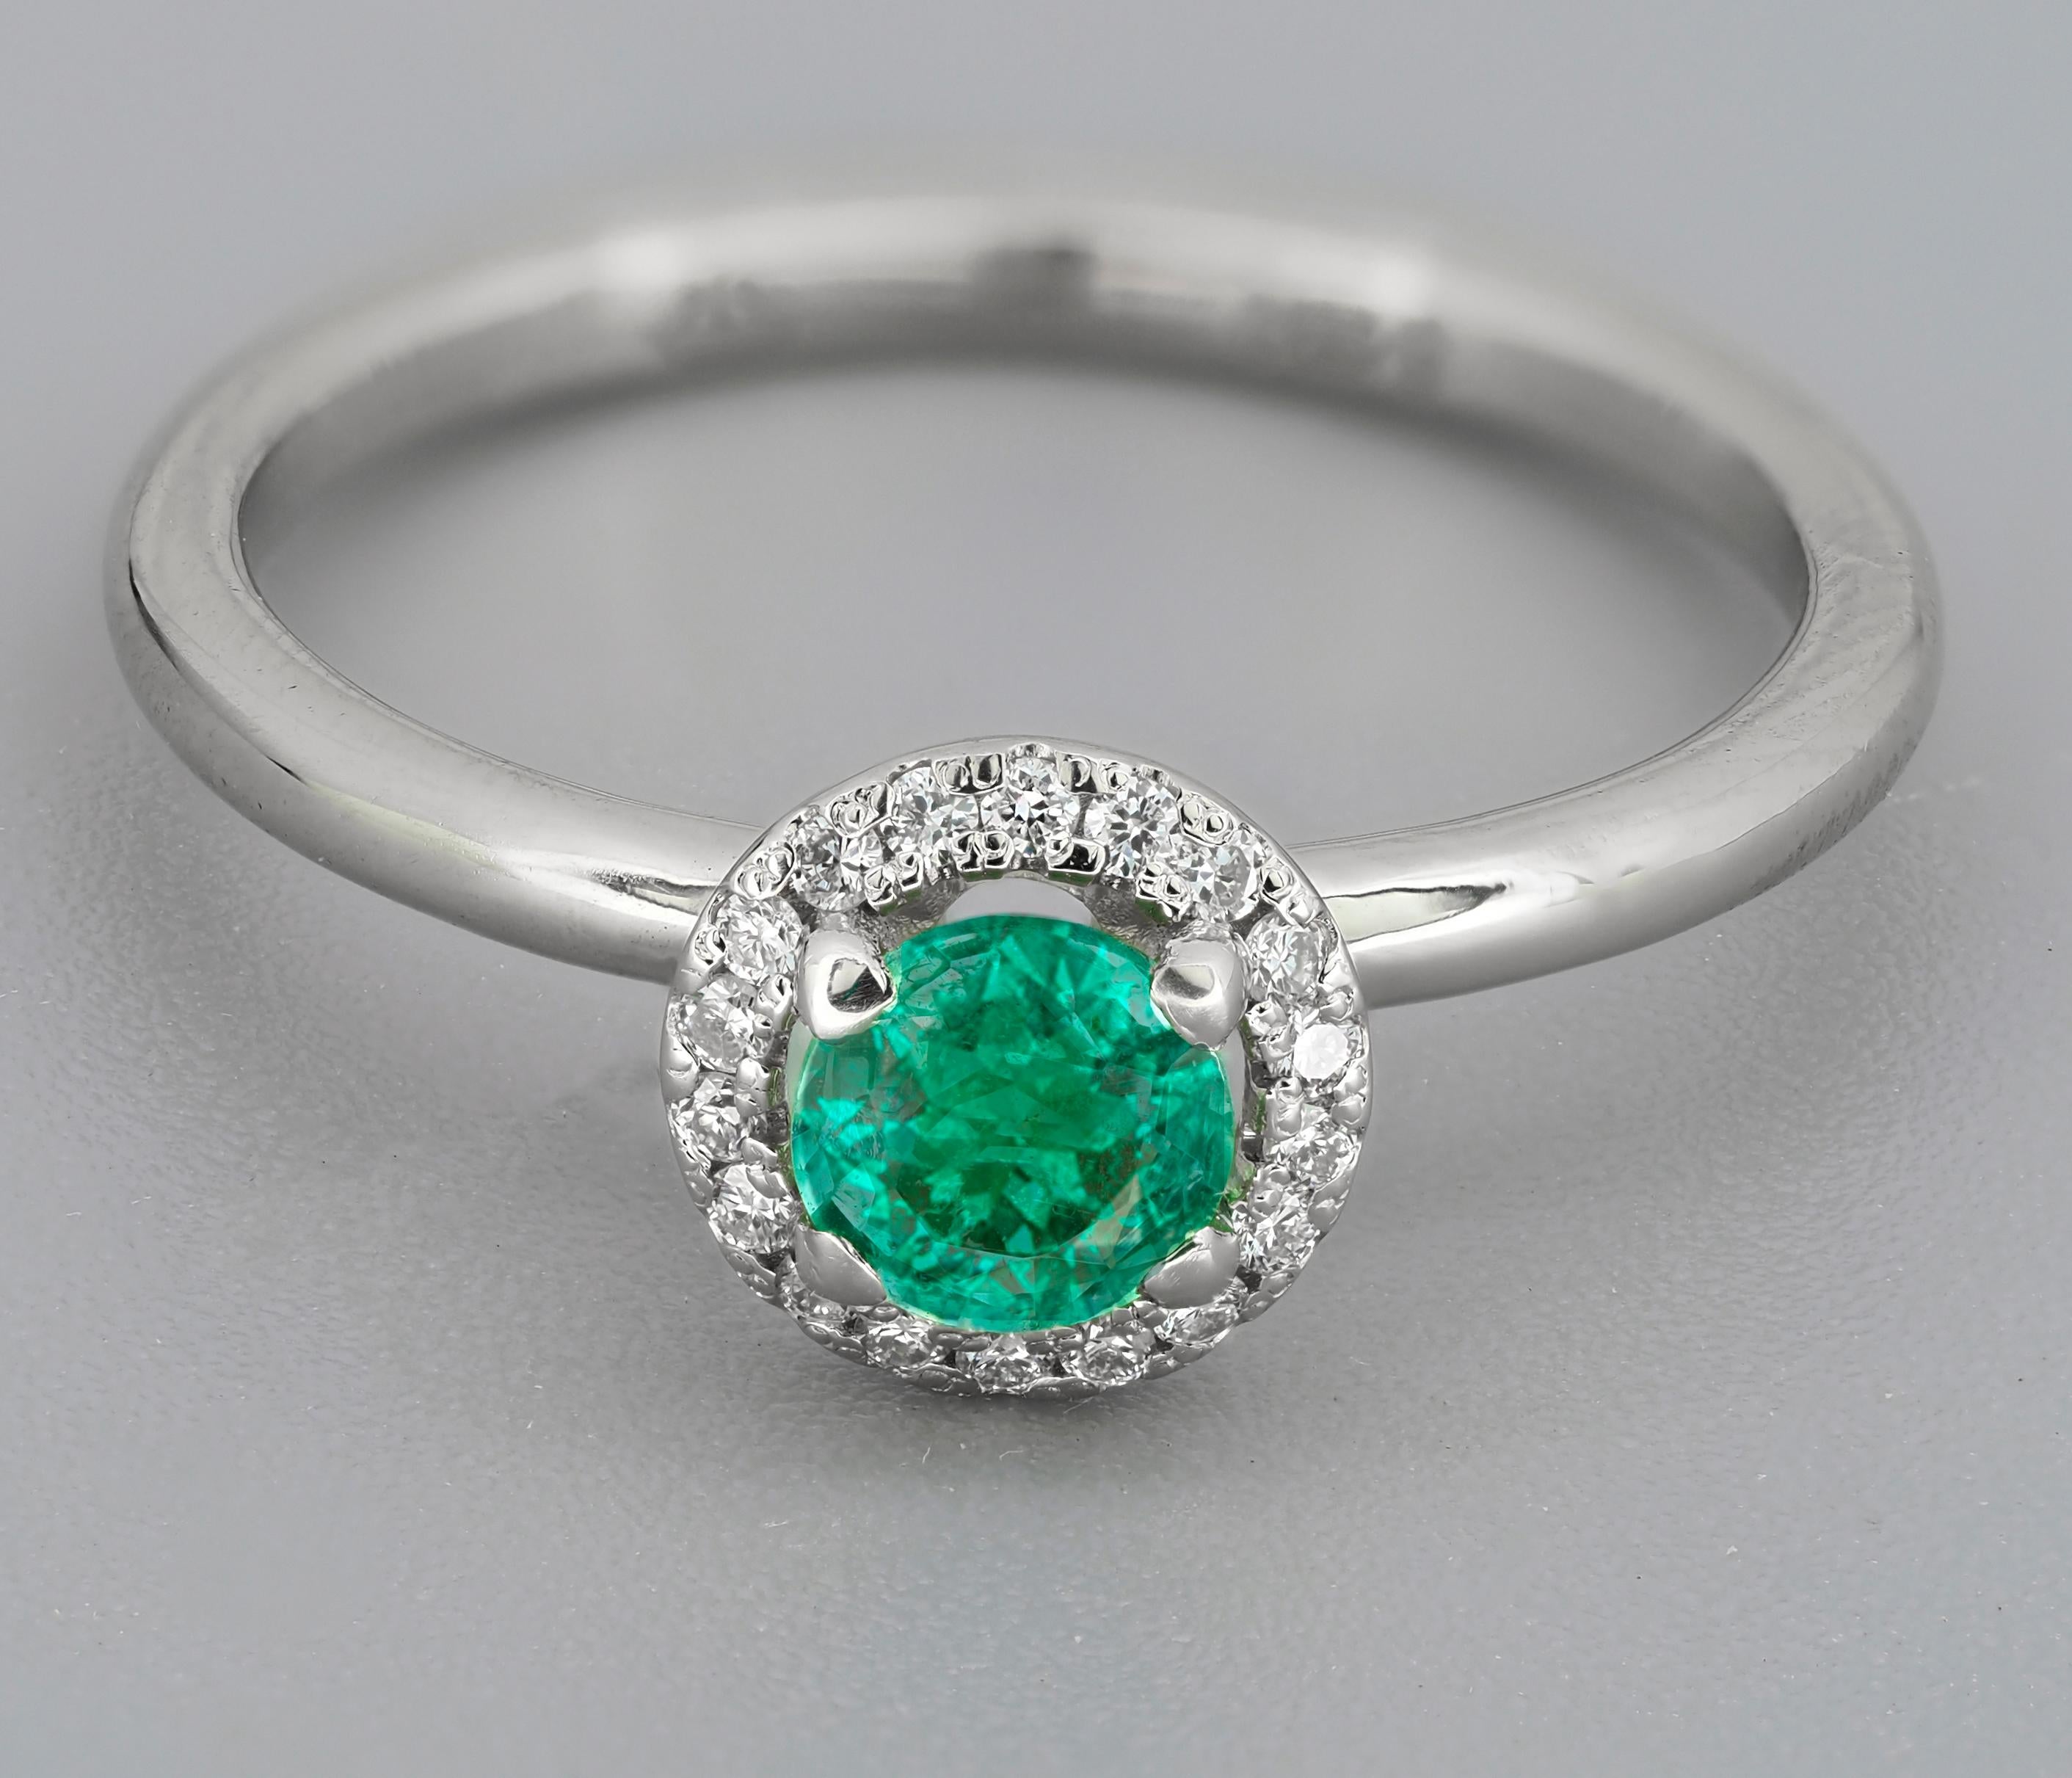 For Sale:  Emerald and Diamonds 14k gold ring.  Emerald Halo Gold Ring. 8